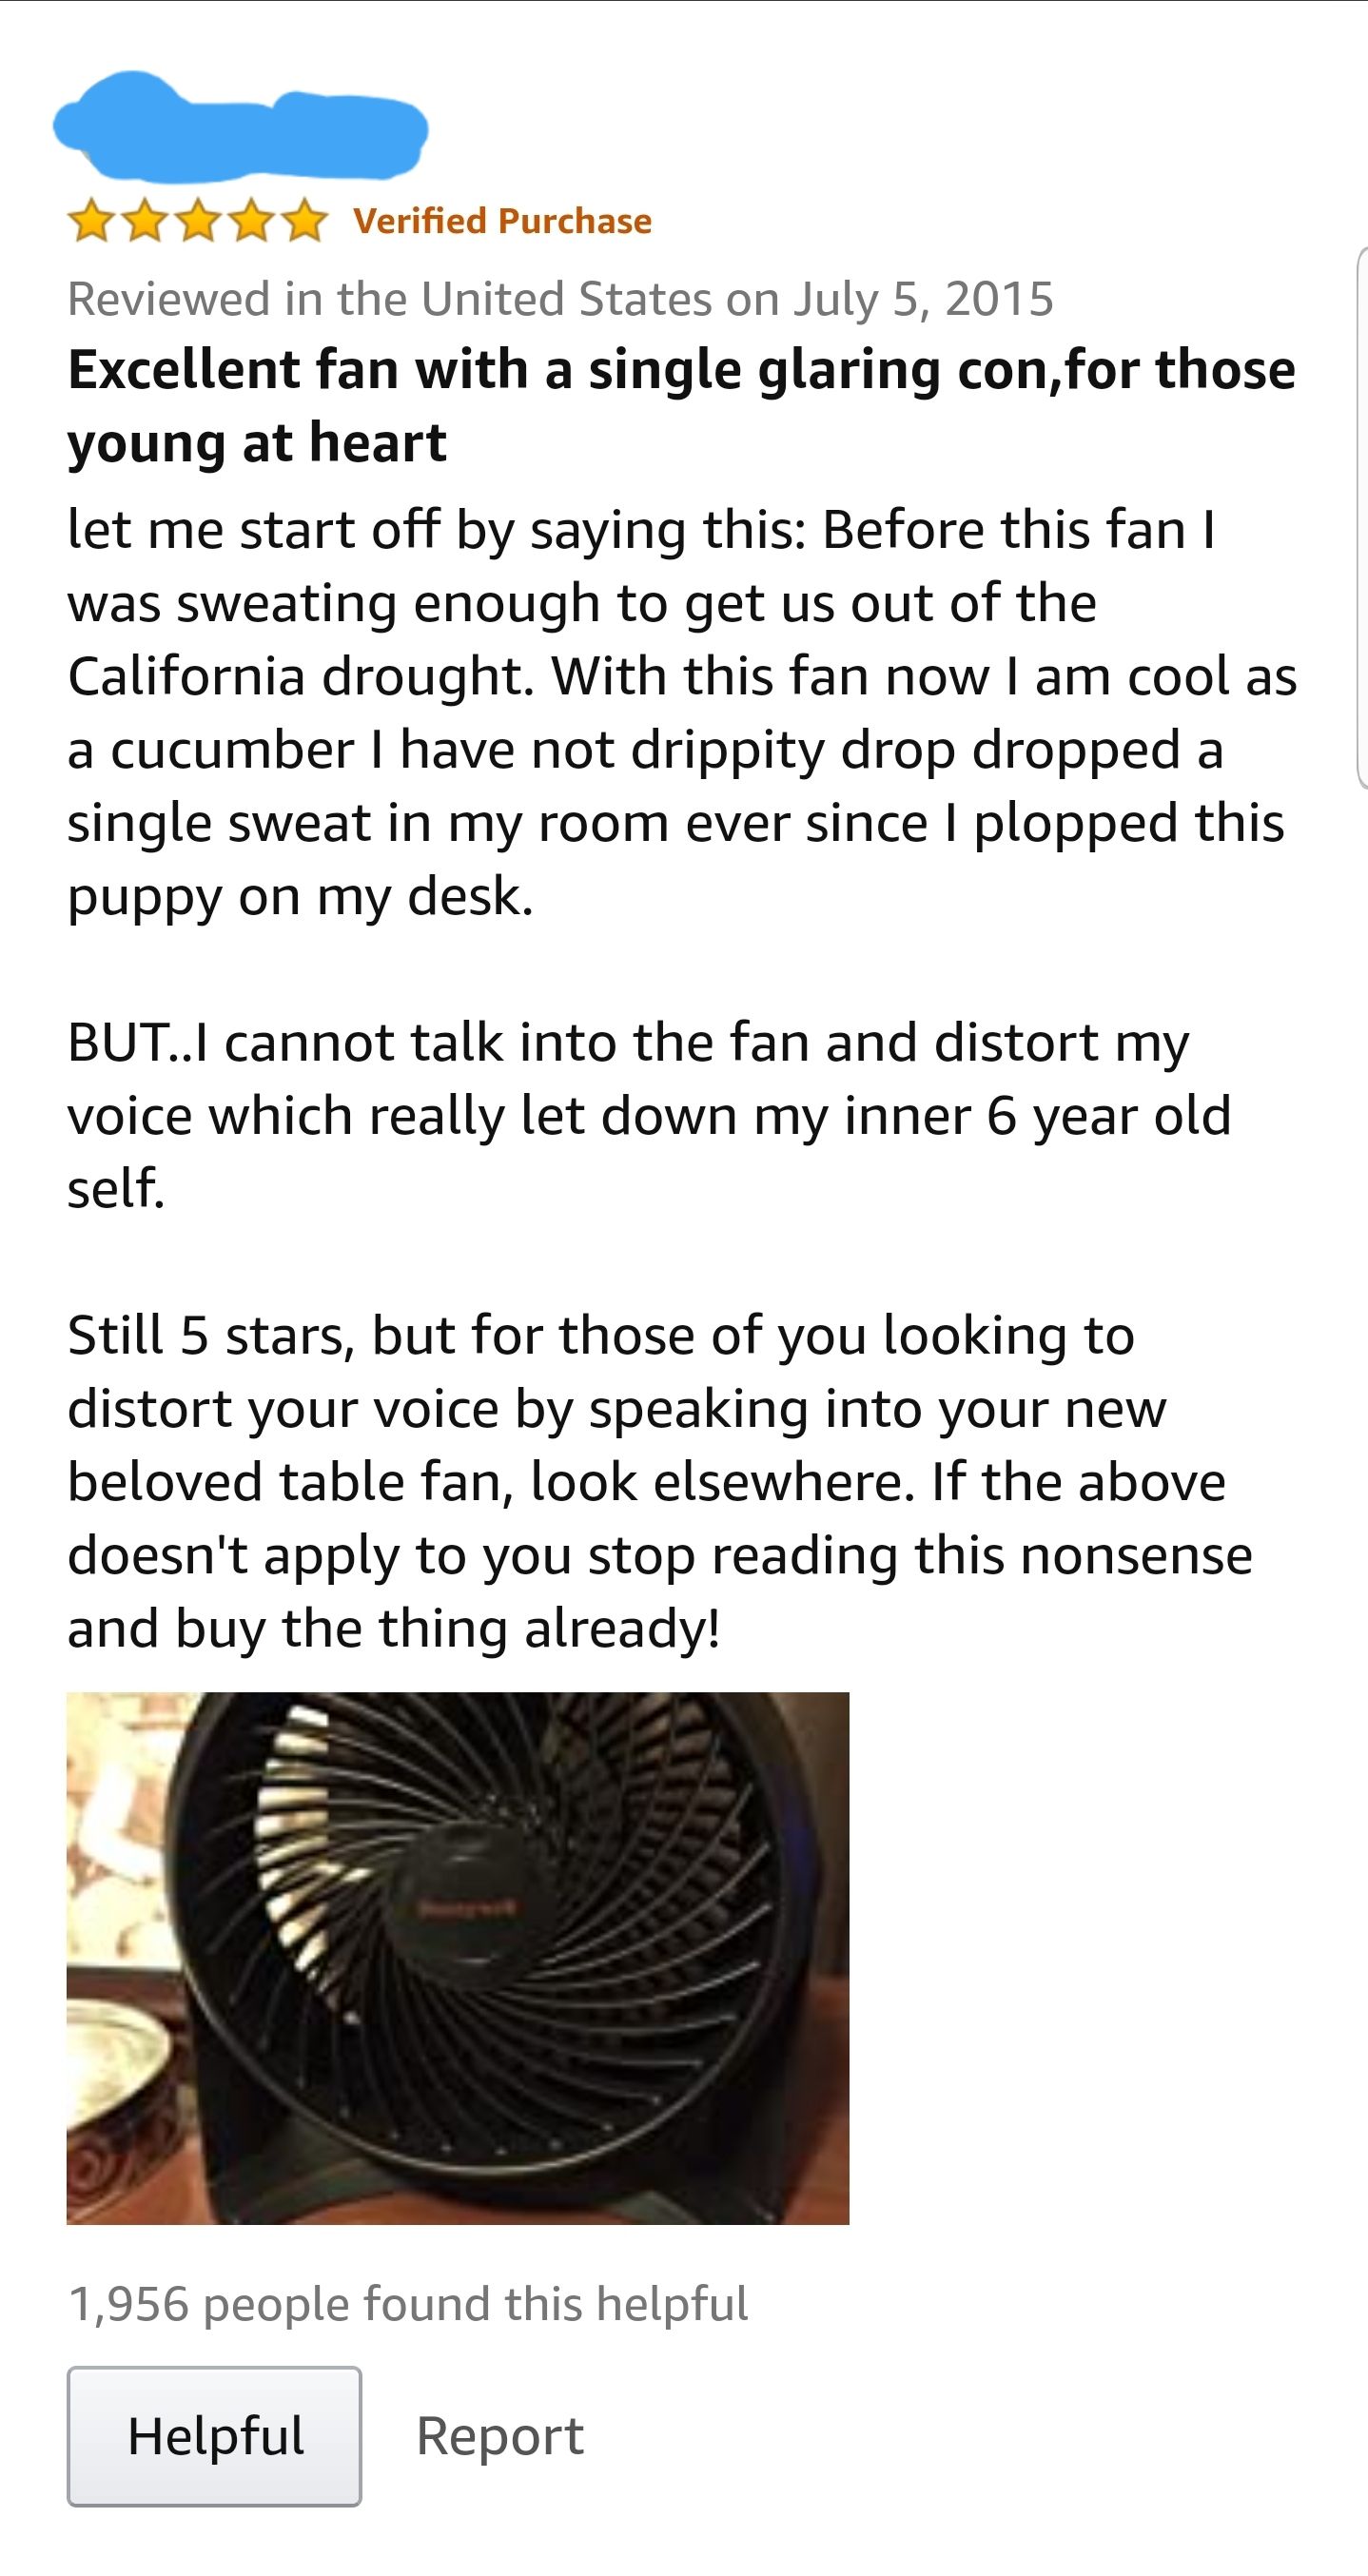 This Amazon review of a fan...